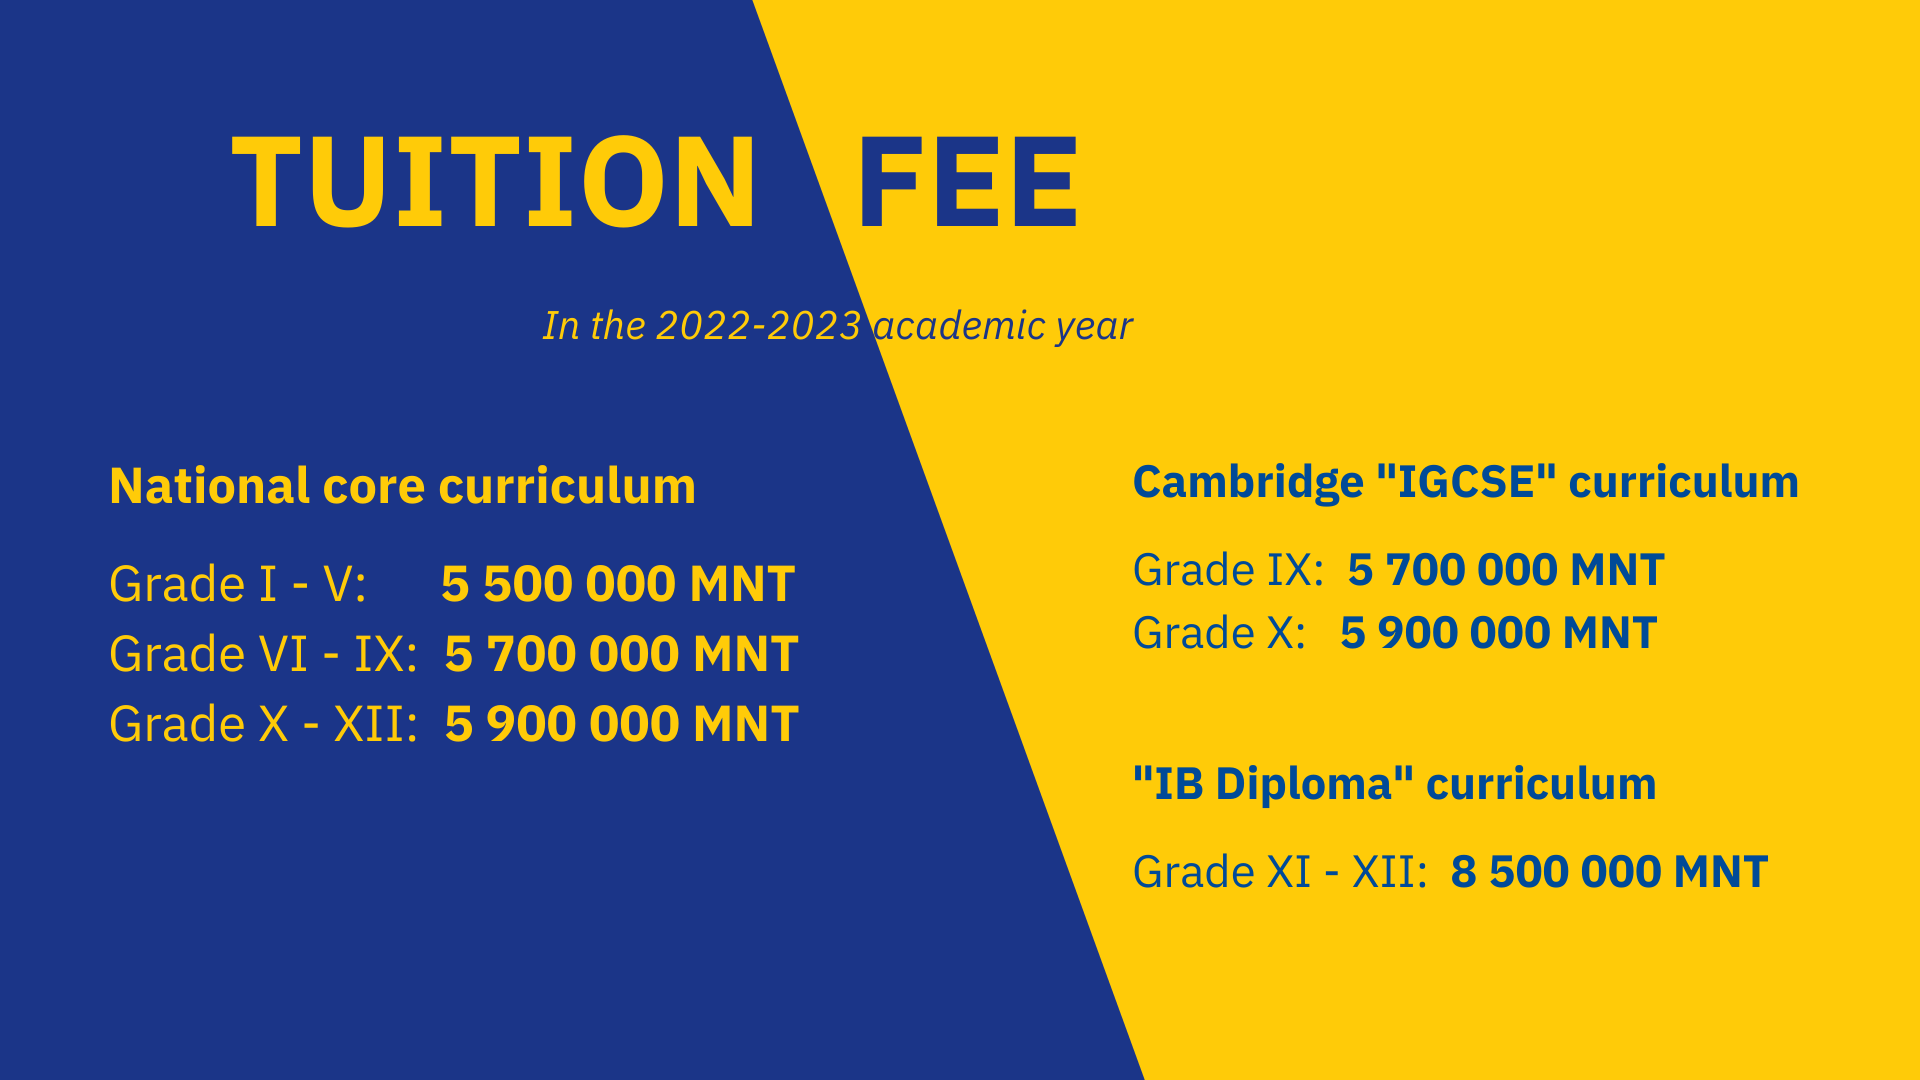 TUITION FEES FOR THE 2022-2023 ACADEMIC YEAR